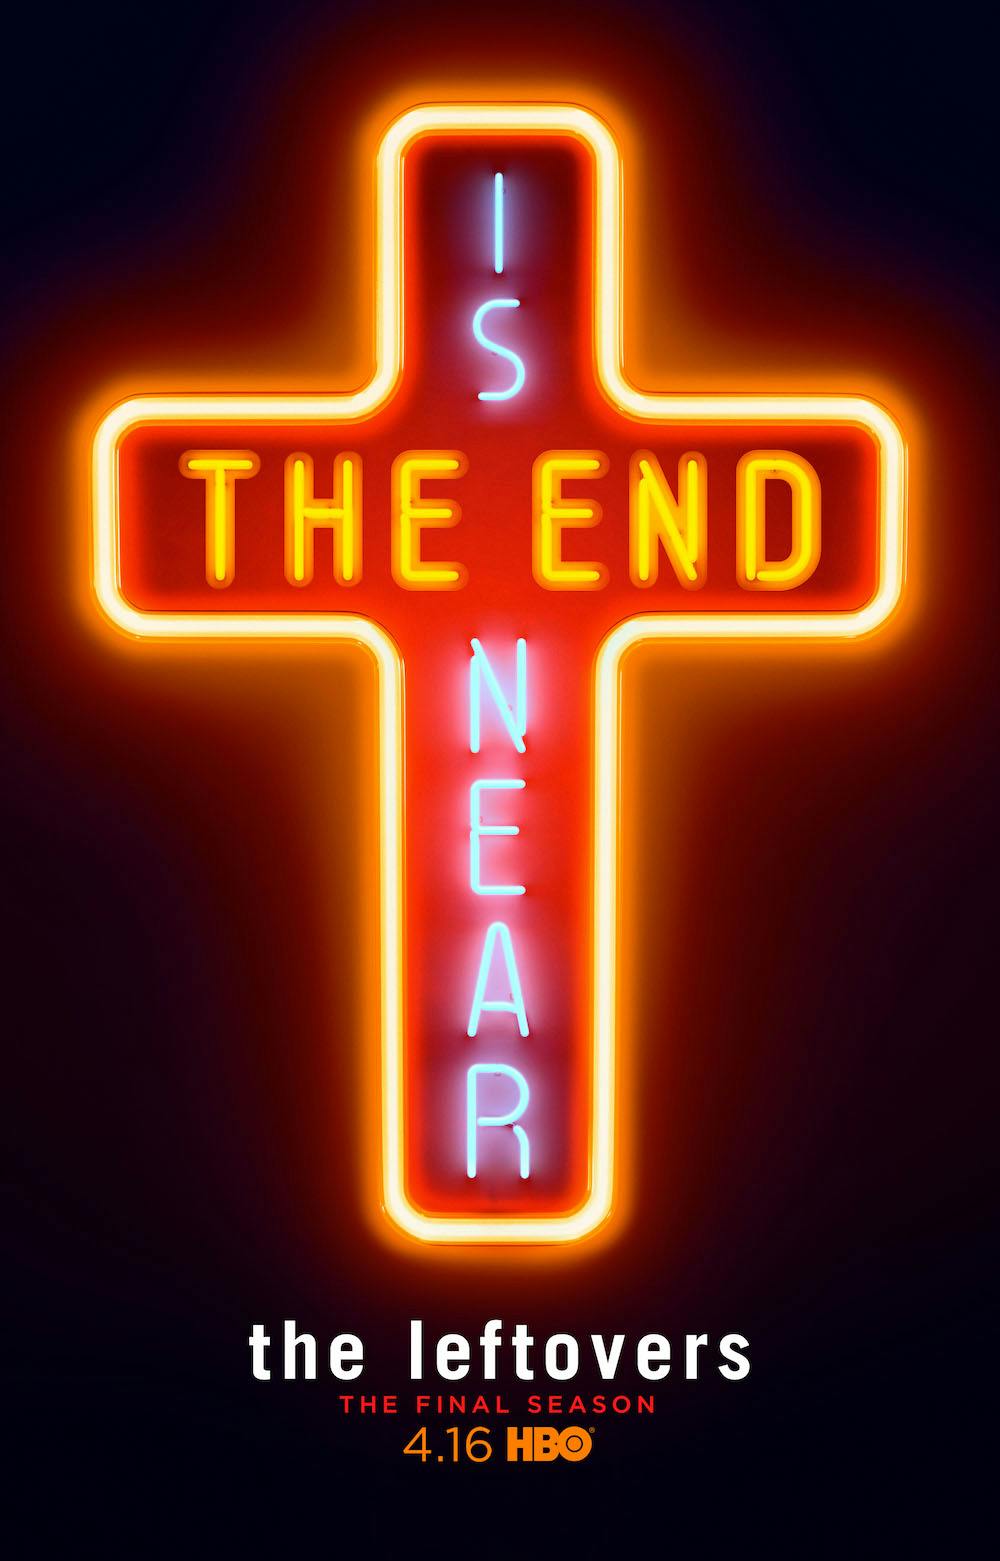 The Leftovers season 3 release date poster